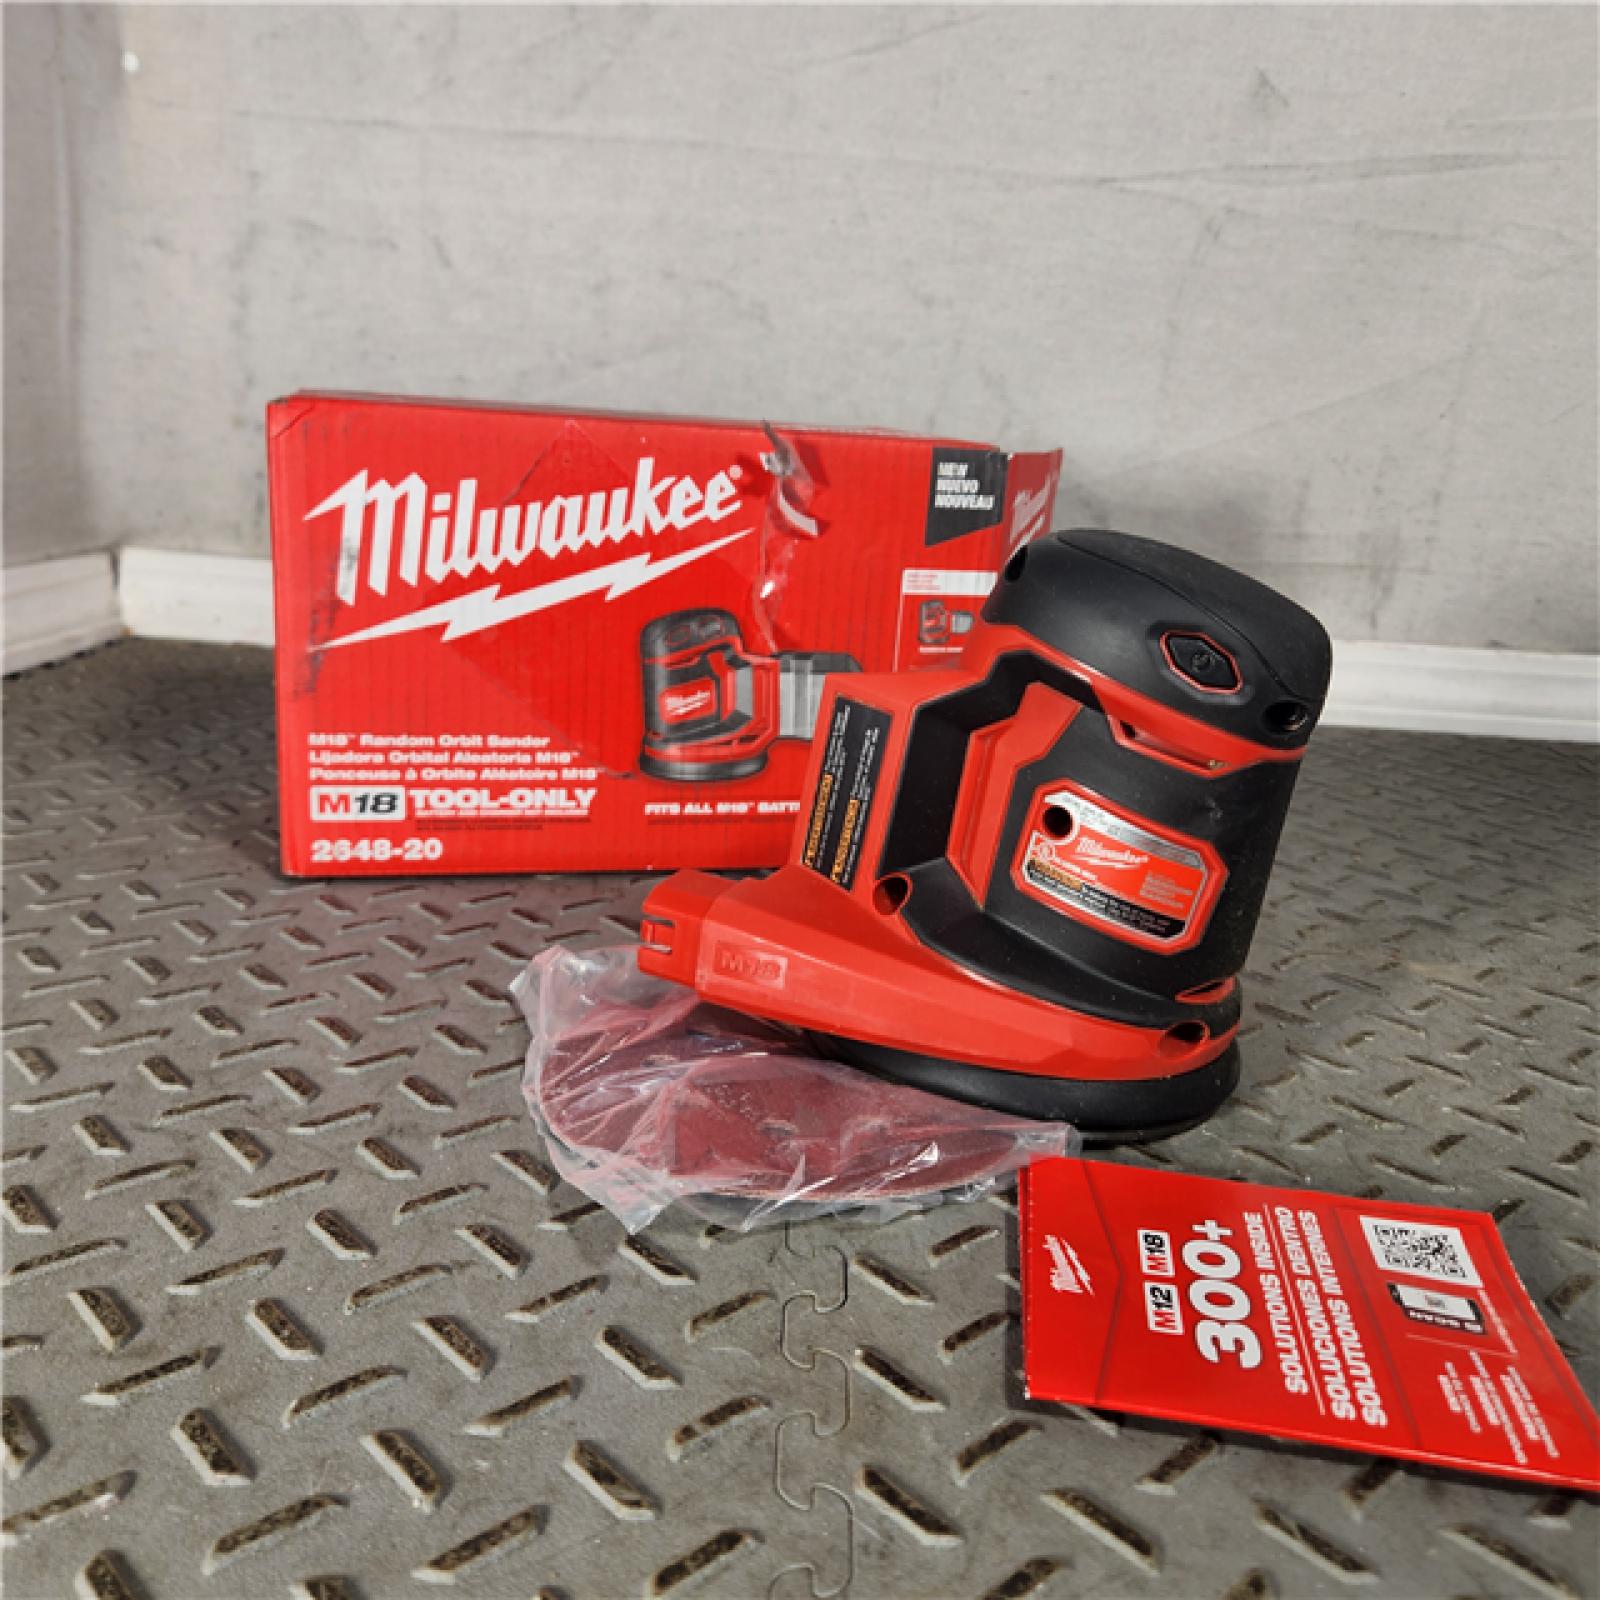 Houston Location - AS-IS Milwaukee 2648-20 - M18 5  7000-12000 Opm Cordless Variable Speed Random Orbital Sander - Appears IN GOOD Condition